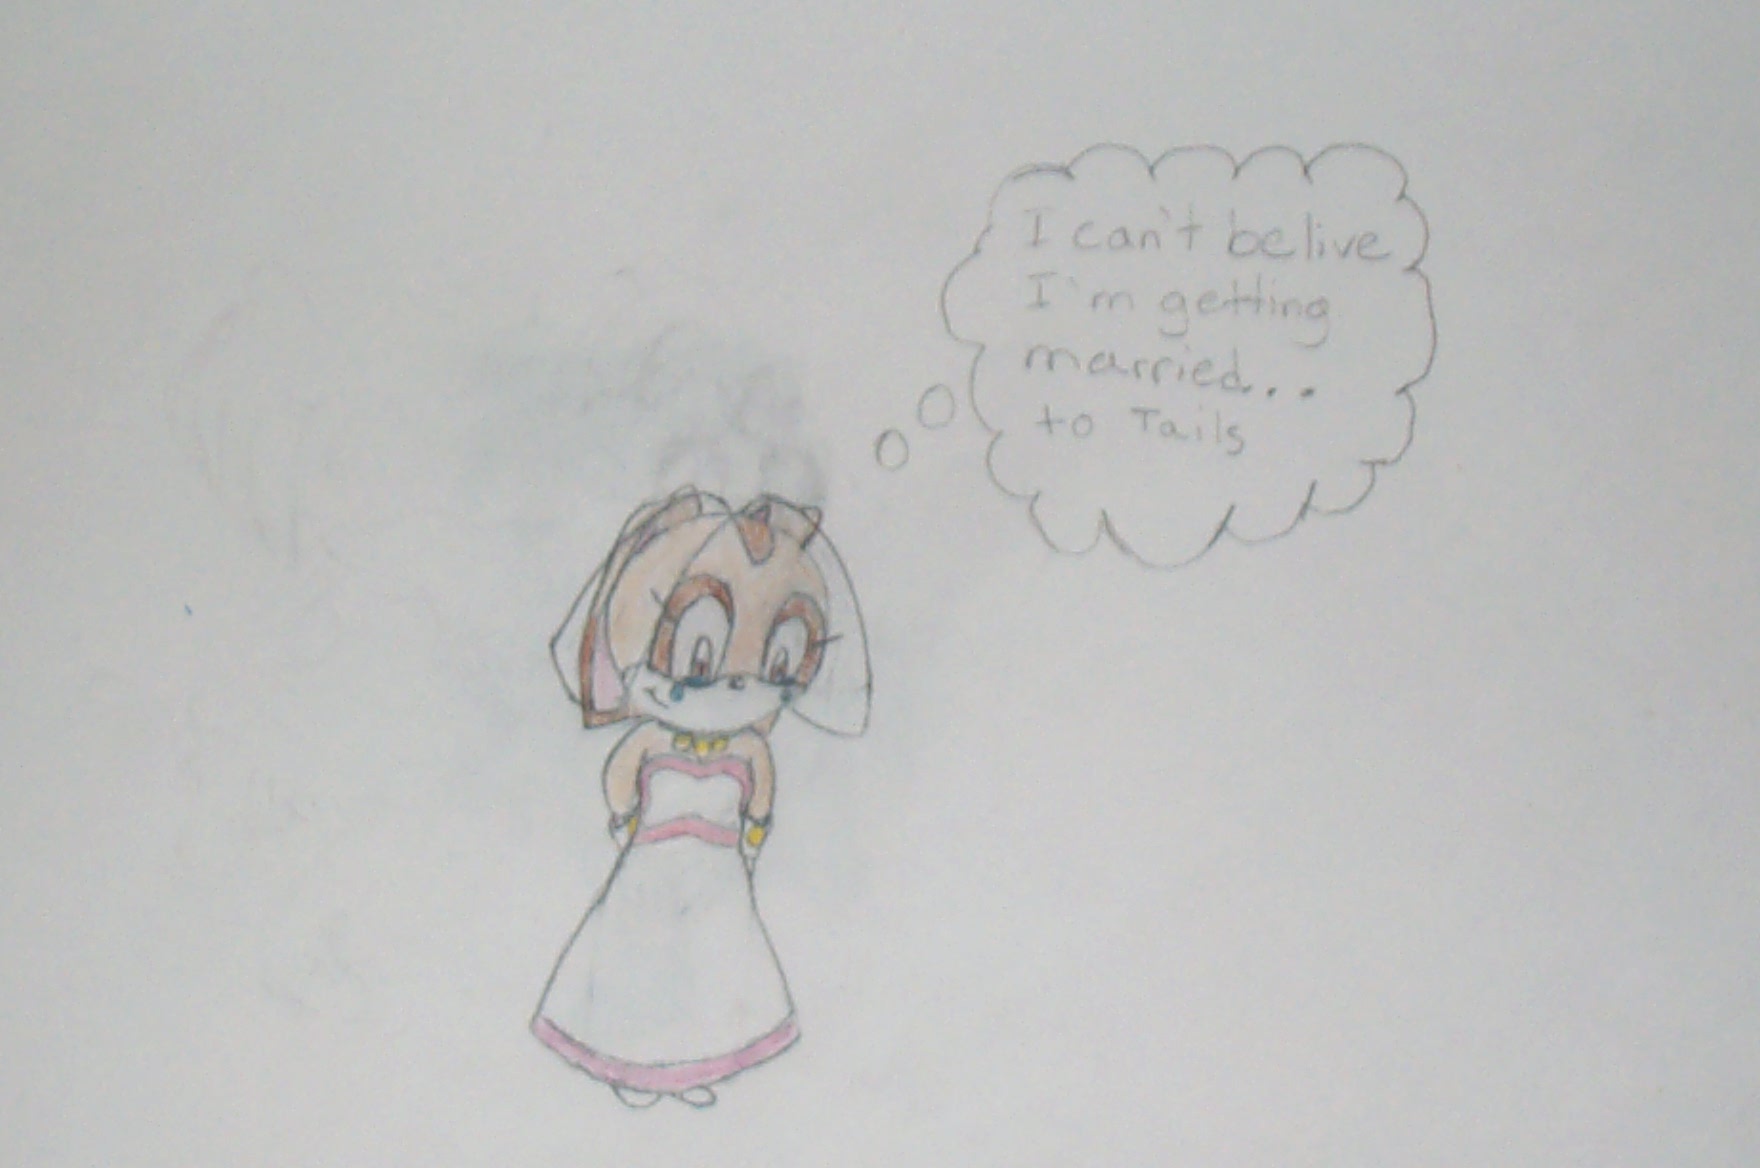 Cream thinking about marrying tails by lil_amy_rose